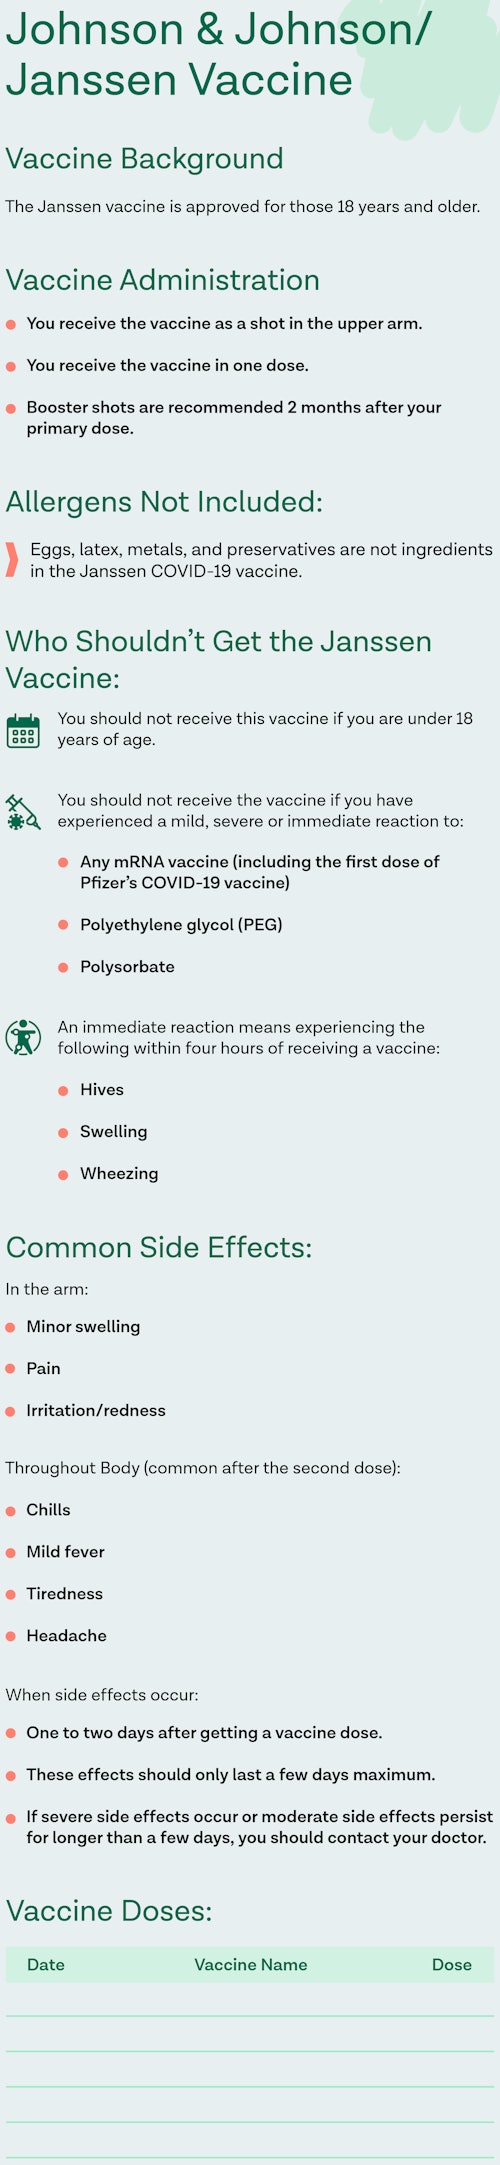 Infographic breaking down must-know information on the Johnson & Johnson/Janssen COVID-19 Vaccine.